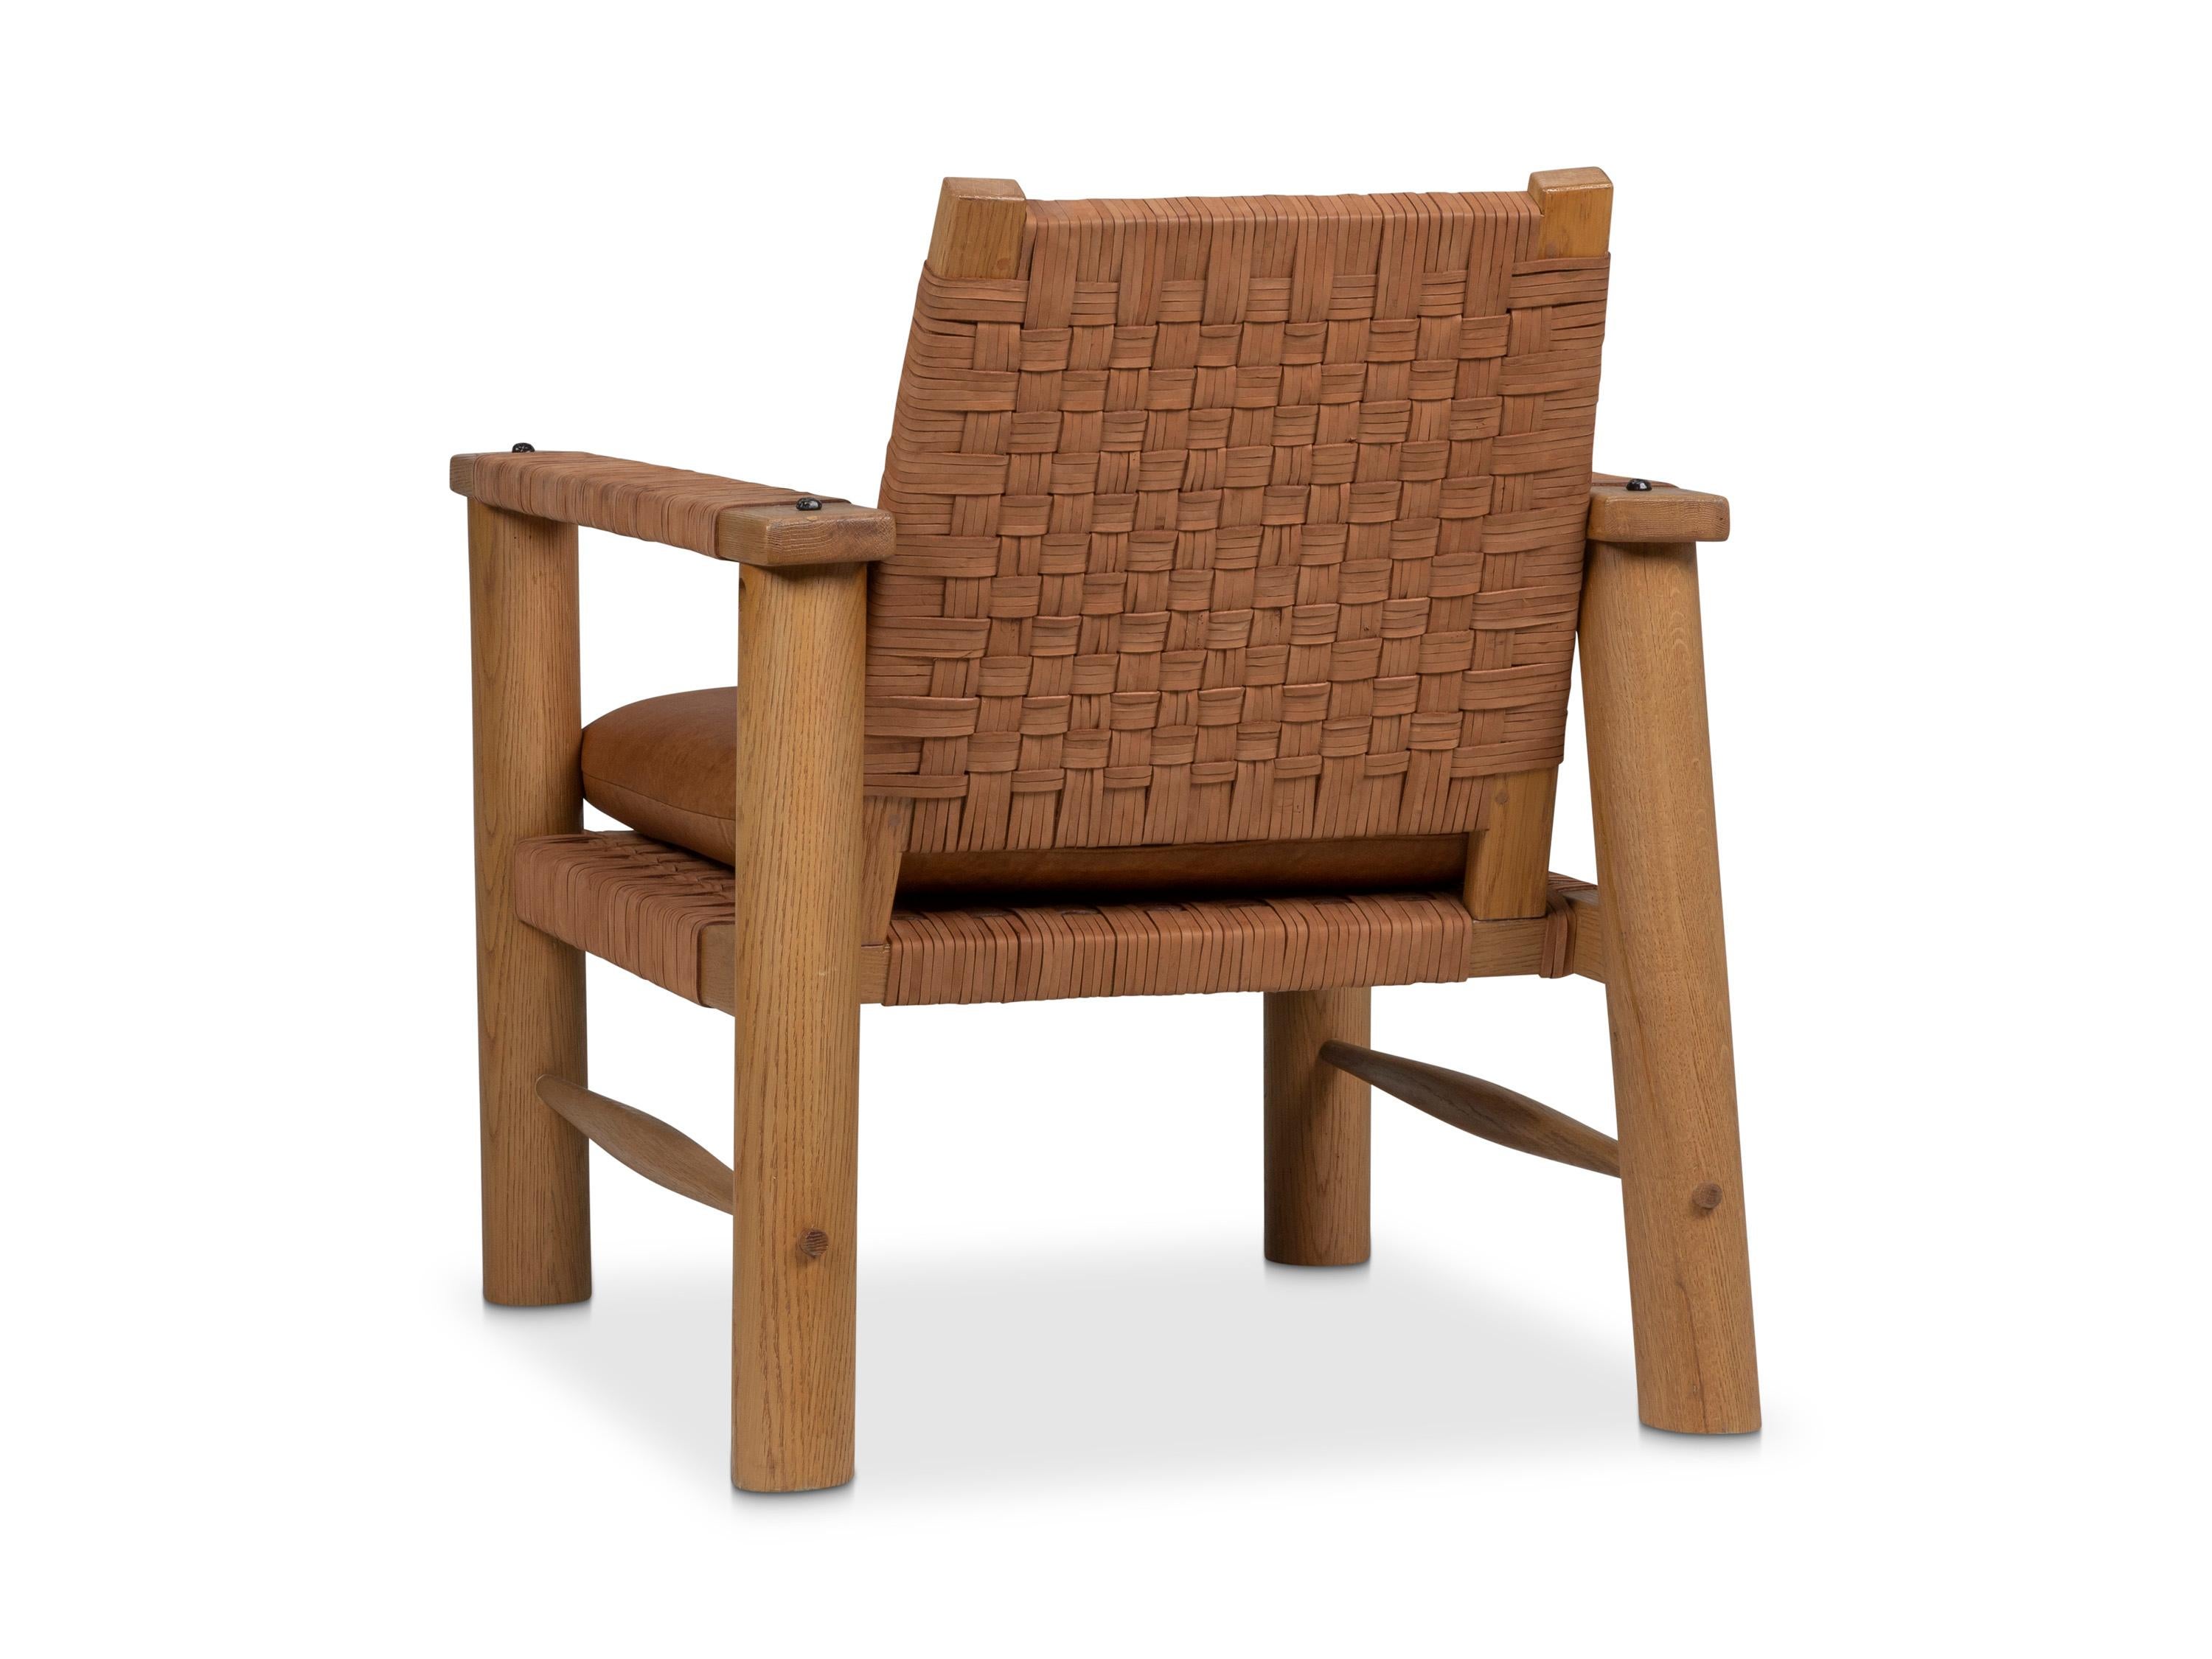 Boldly scaled vintage French rustic lounge chair given a contemporary urban vibe with woven rough out suede seat, back, and arm panels. Sturdy, large turn legs and wide wood arms convey a masculine feel. Comes with a matching leather seat